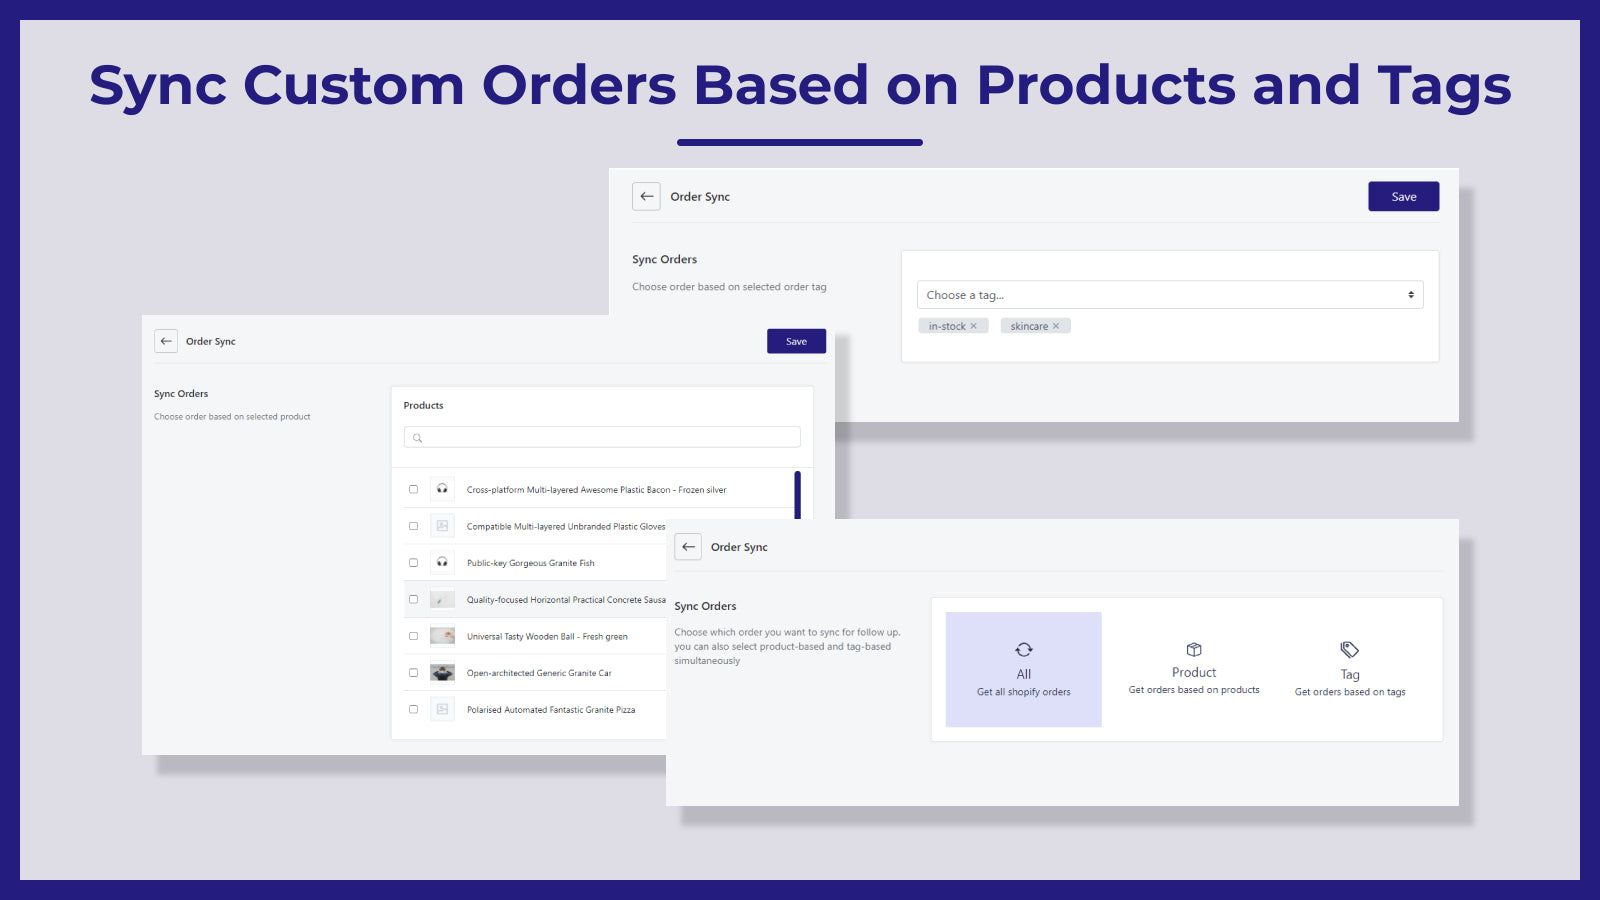 Sync Custom Orders Based on Products and Tags